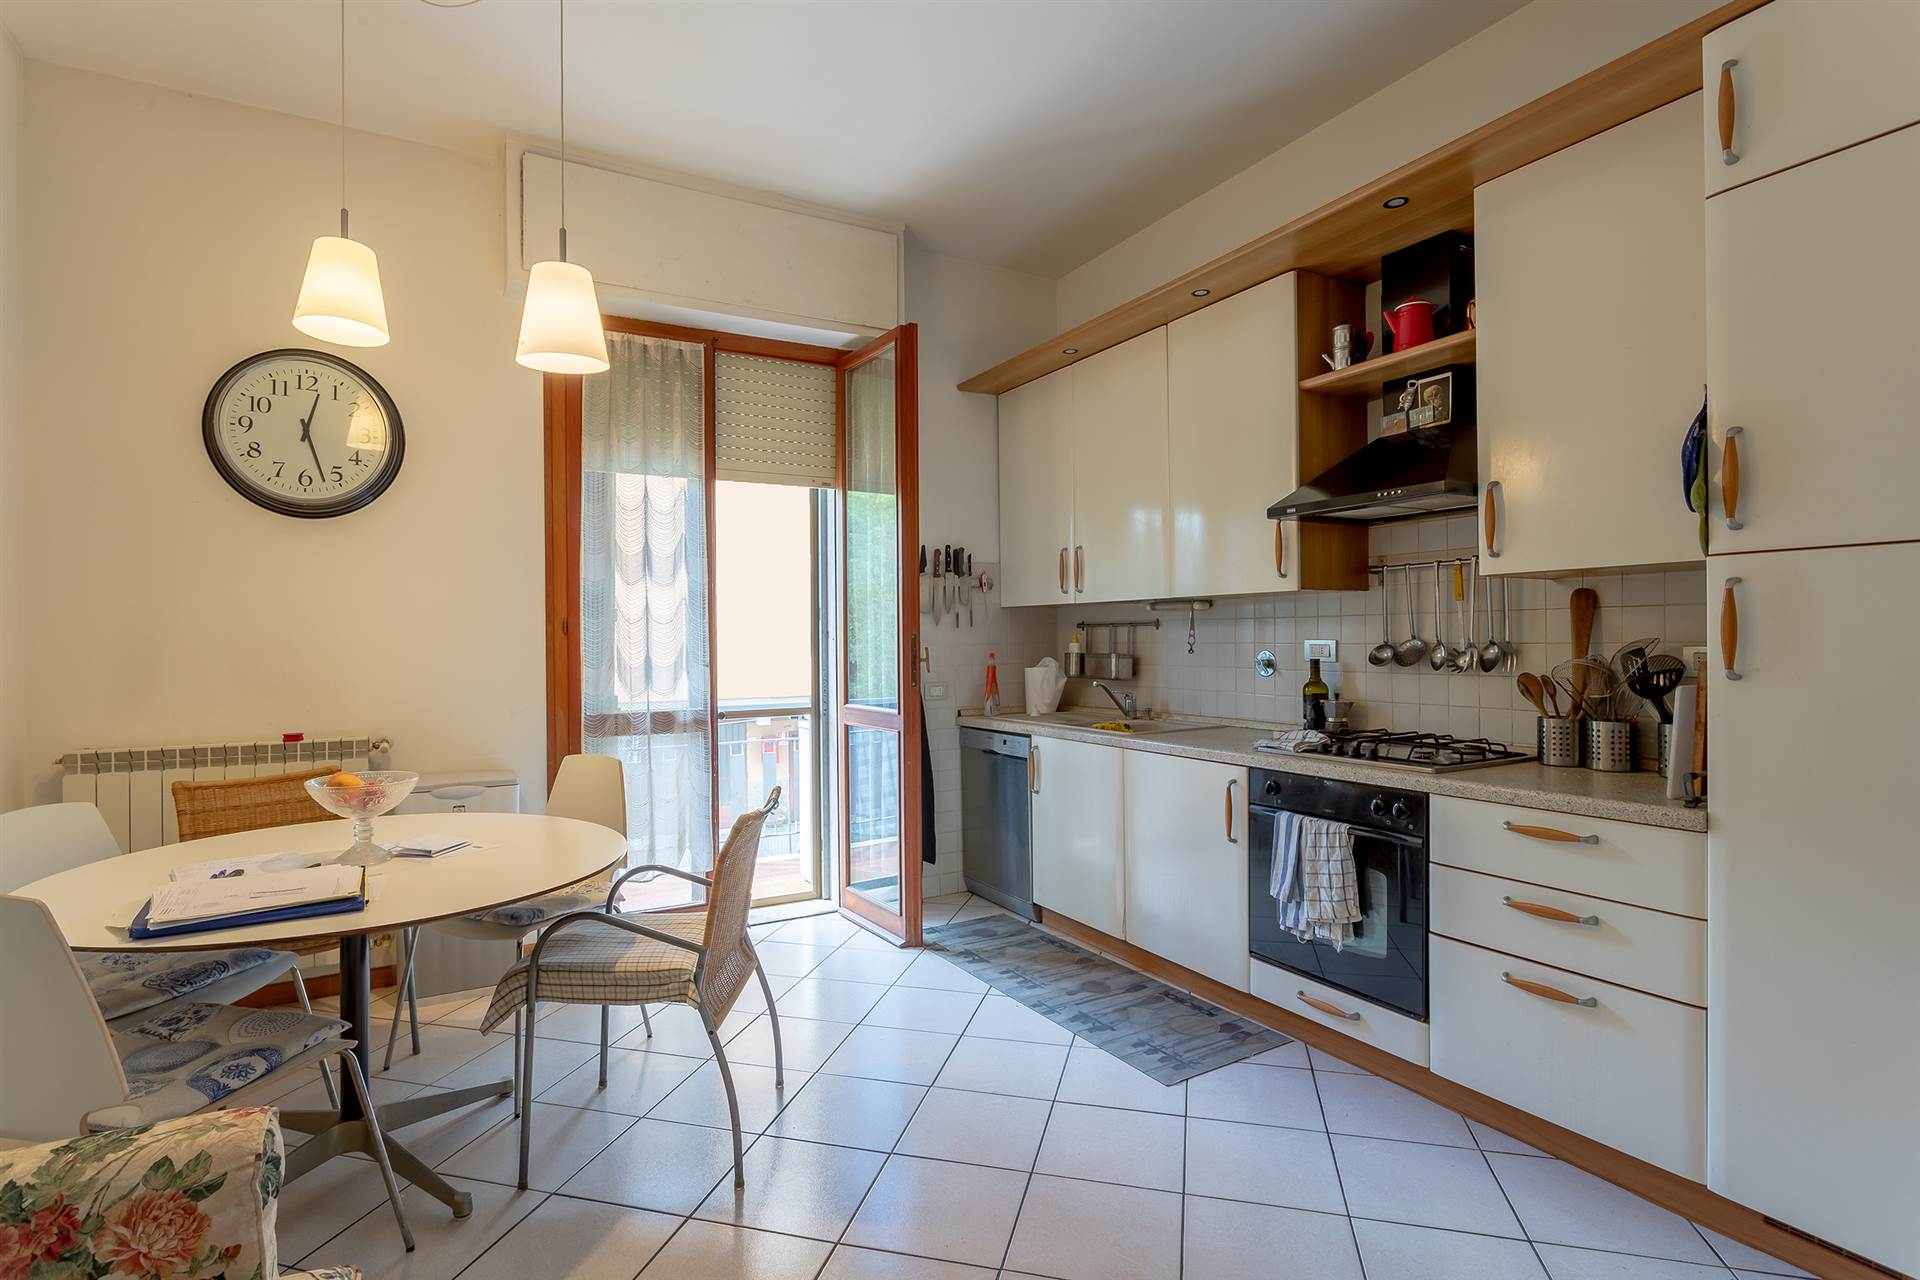 SAN MAURO A SIGNA, SIGNA, Apartment for sale of 75 Sq. mt., Good condition, Heating Individual heating system, Energetic class: G, placed at 1° on 4, composed by: 3 Rooms, Kitchenette, , 2 Bedrooms, 